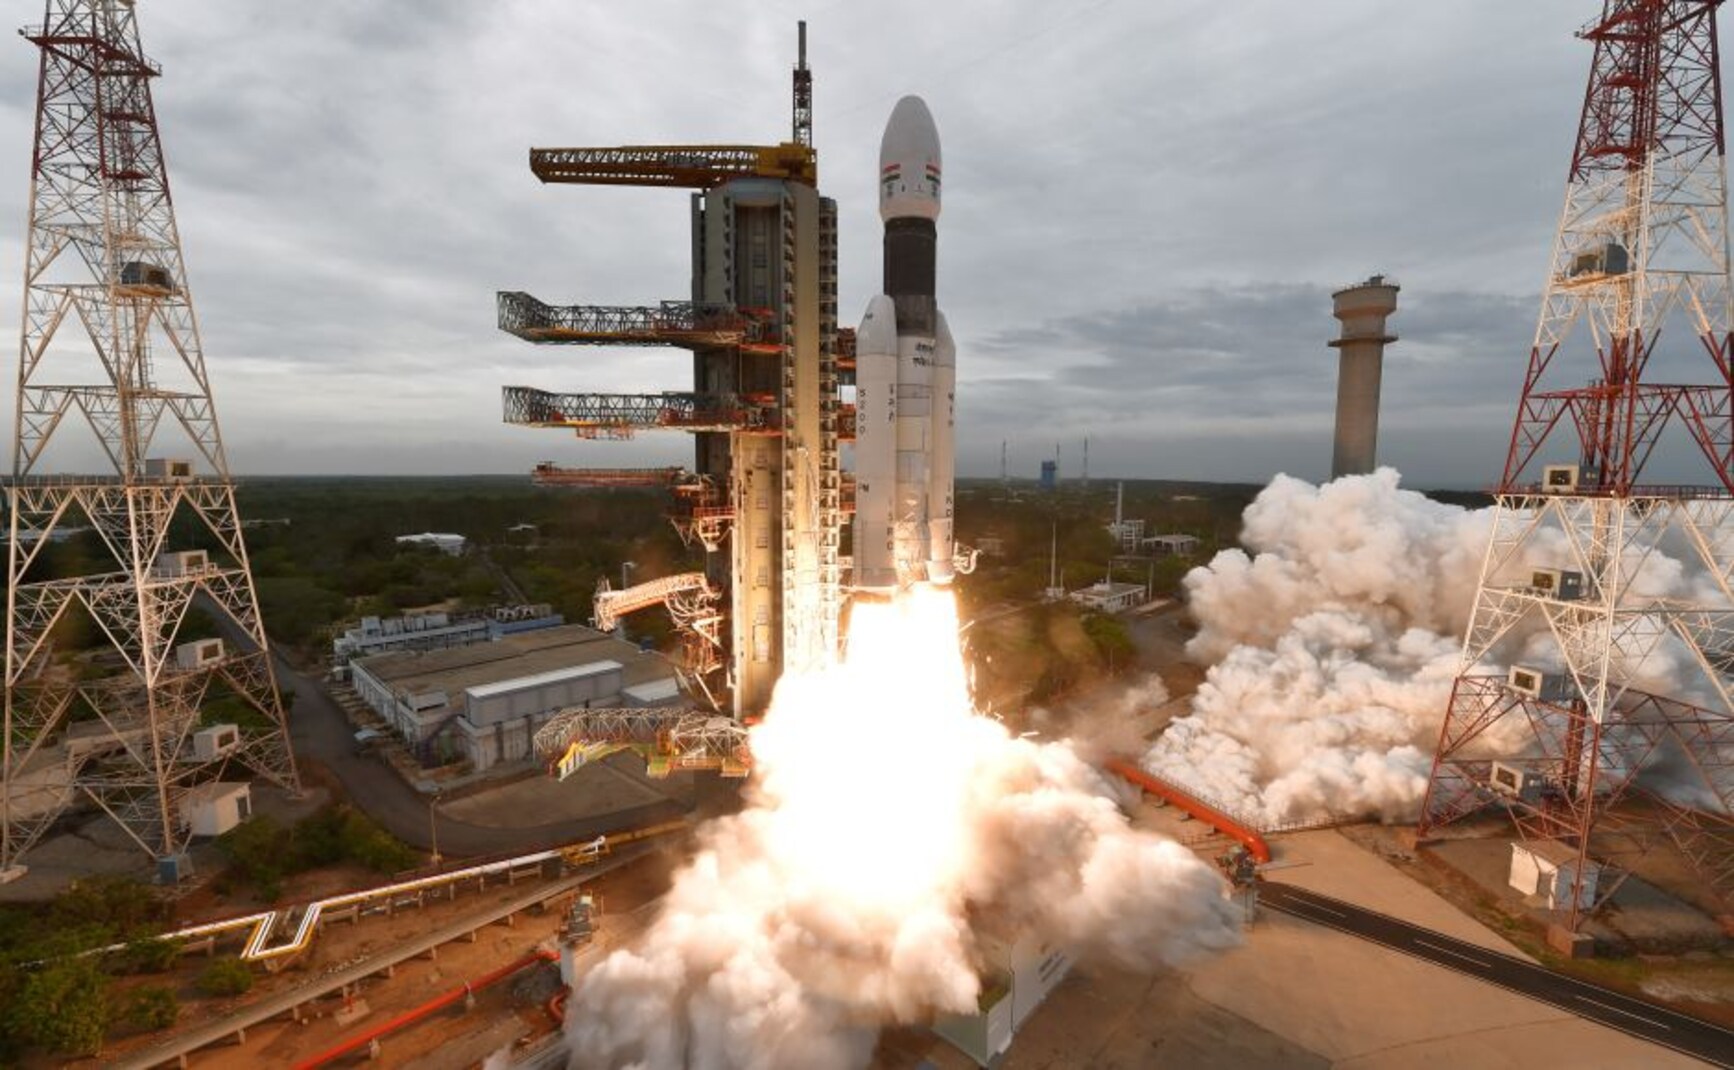 On Monday afternoon, India successfully launched its second moon mission Chandrayaan 2 onboard its most powerful rocket, the Geosynchronous Satellite Launch Vehicle (GSLV-MkIII-M1). They plan to land a rover and lander on the moon, on 7 September, to explore the lunar south pole. ISRO